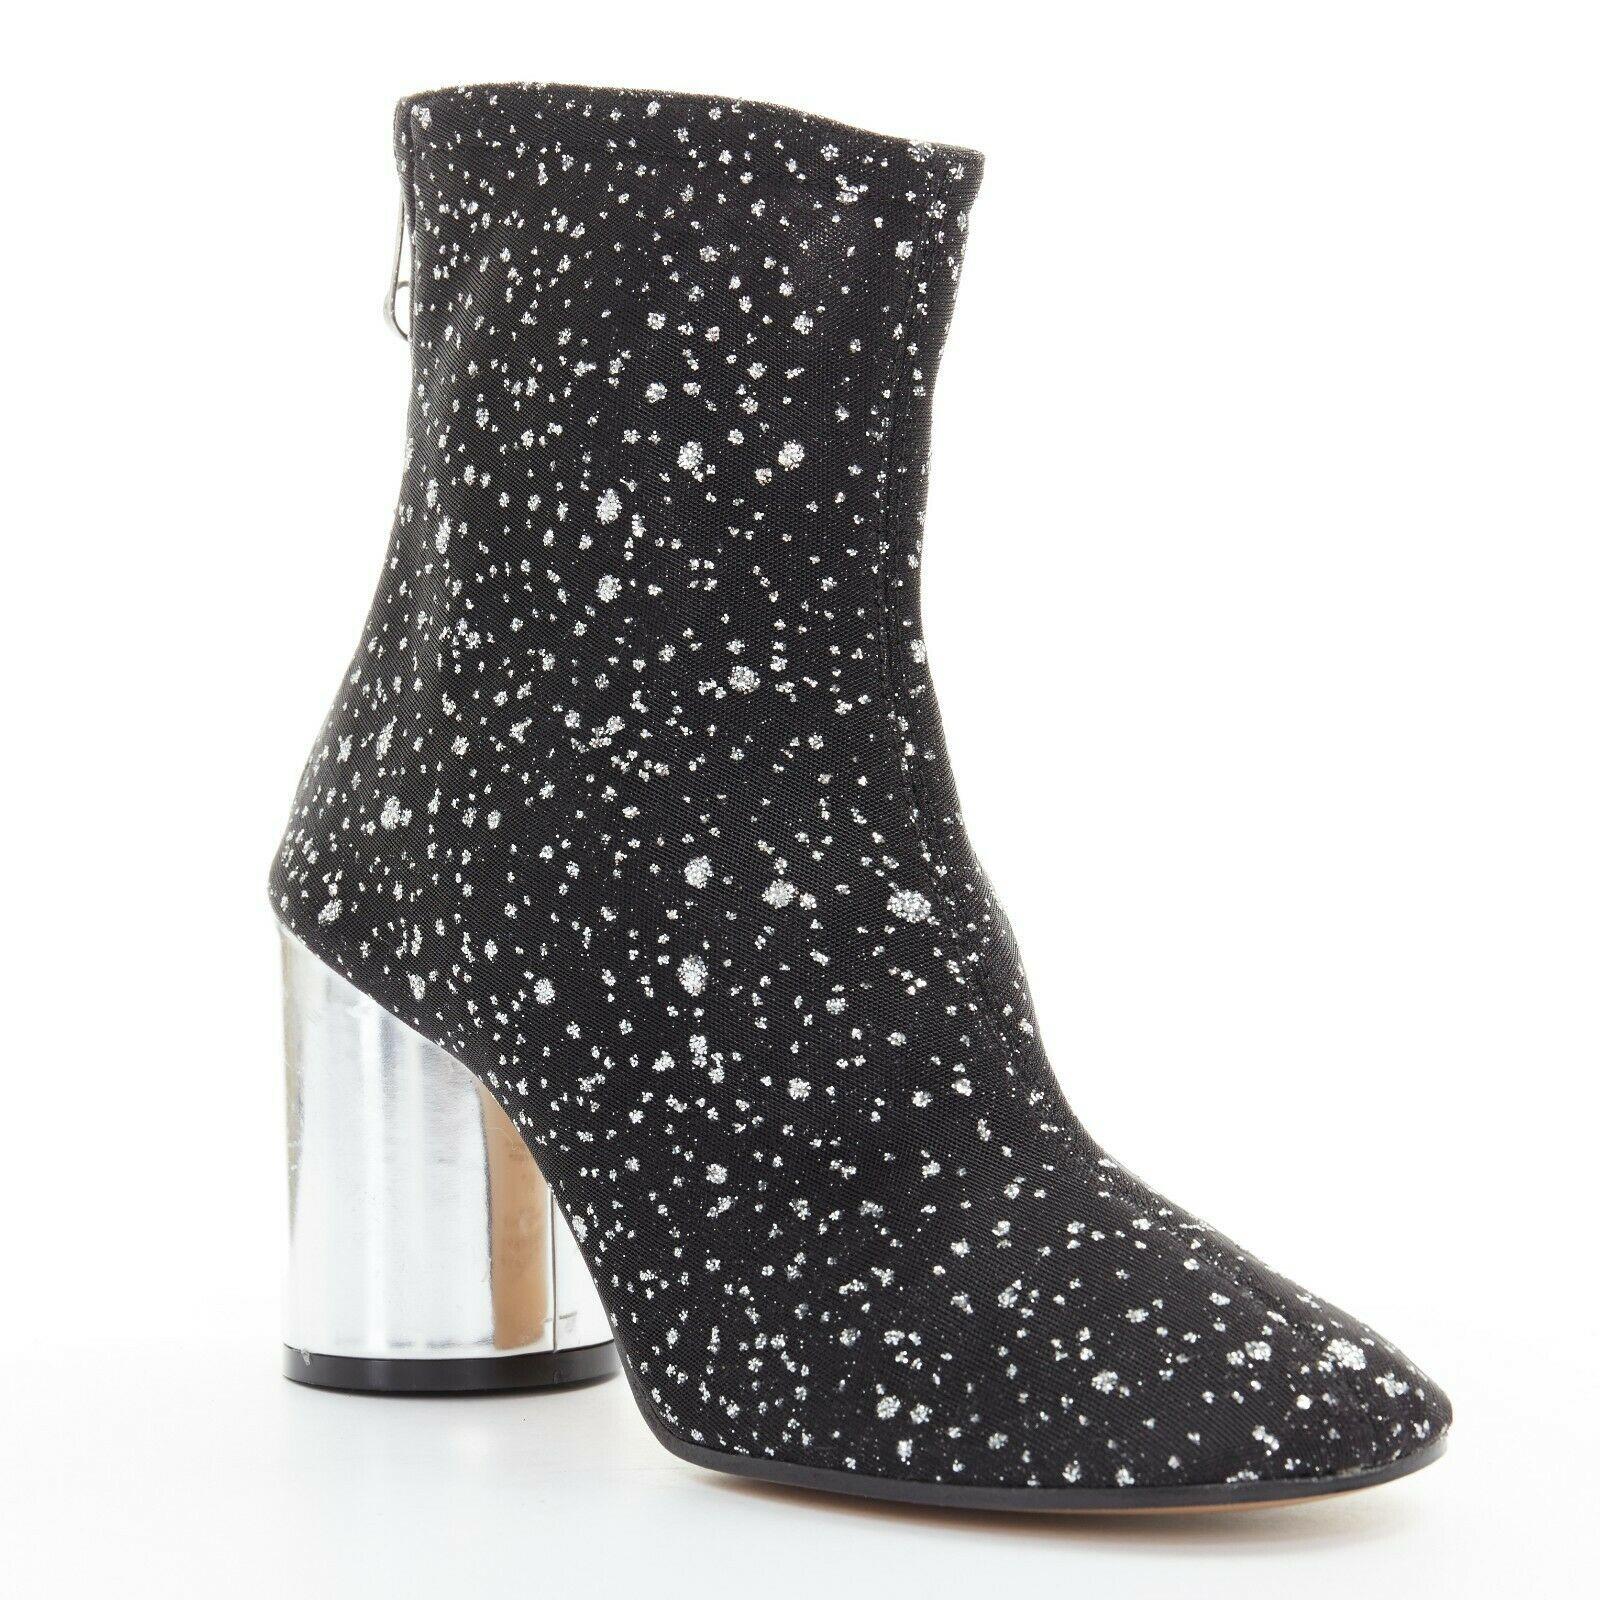 new MAISON MARGIELA black mesh speckle glitter silver chunky heel bootie EU39

MAISON MARGIELA
Black mesh upper. Silver speckle glitter. Round toe. Ankle length shaft. Silver leather covered cylindrical chunky heel. Zip back closure. Paper clip